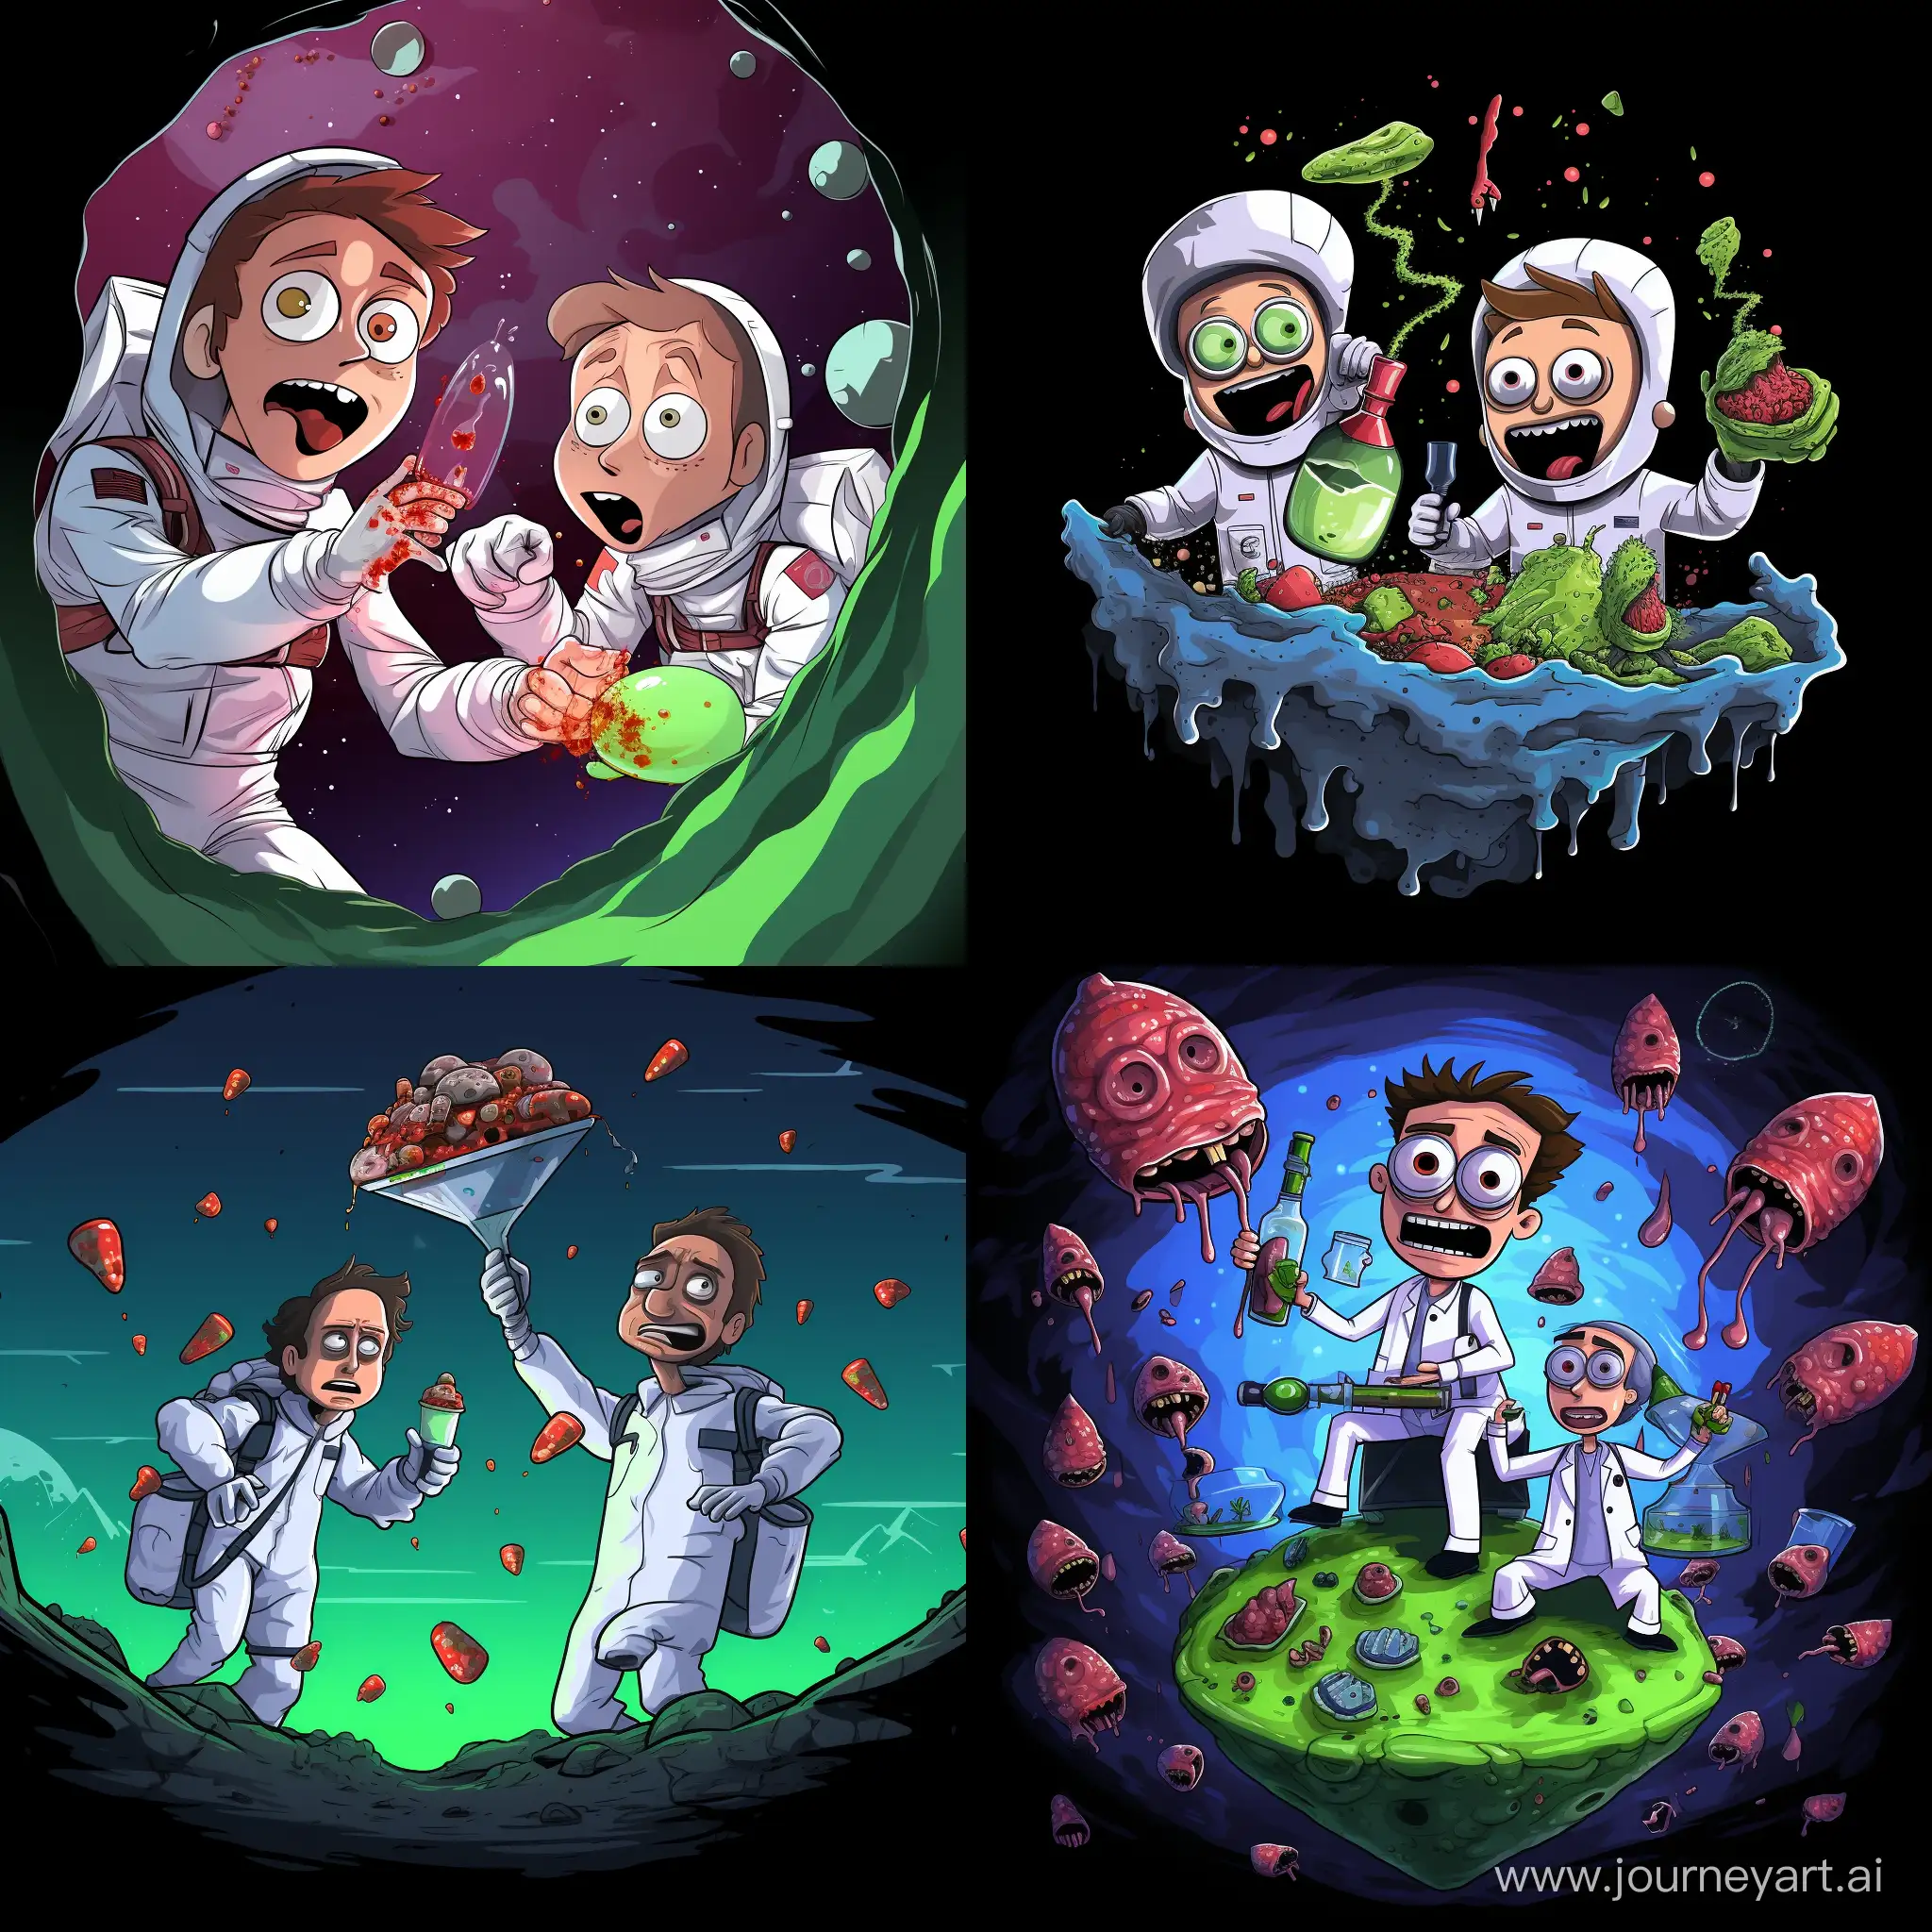 Rick Sanchez, wearing a lab coat and an astronaut helmet, and Morty are holding hands, Morty is holding a half-eaten red psilocybin mushroom with white dots in one hand, and in Rick's hand is a conical flask half filled with a green shiny liquid, they are willingly falling towards the black hole, It's like psilocybin mushrooms are sprouting from the left and right of the black hole, colorful kaleidoscope shapes mixed with black color, ultra-realistic, 4K.